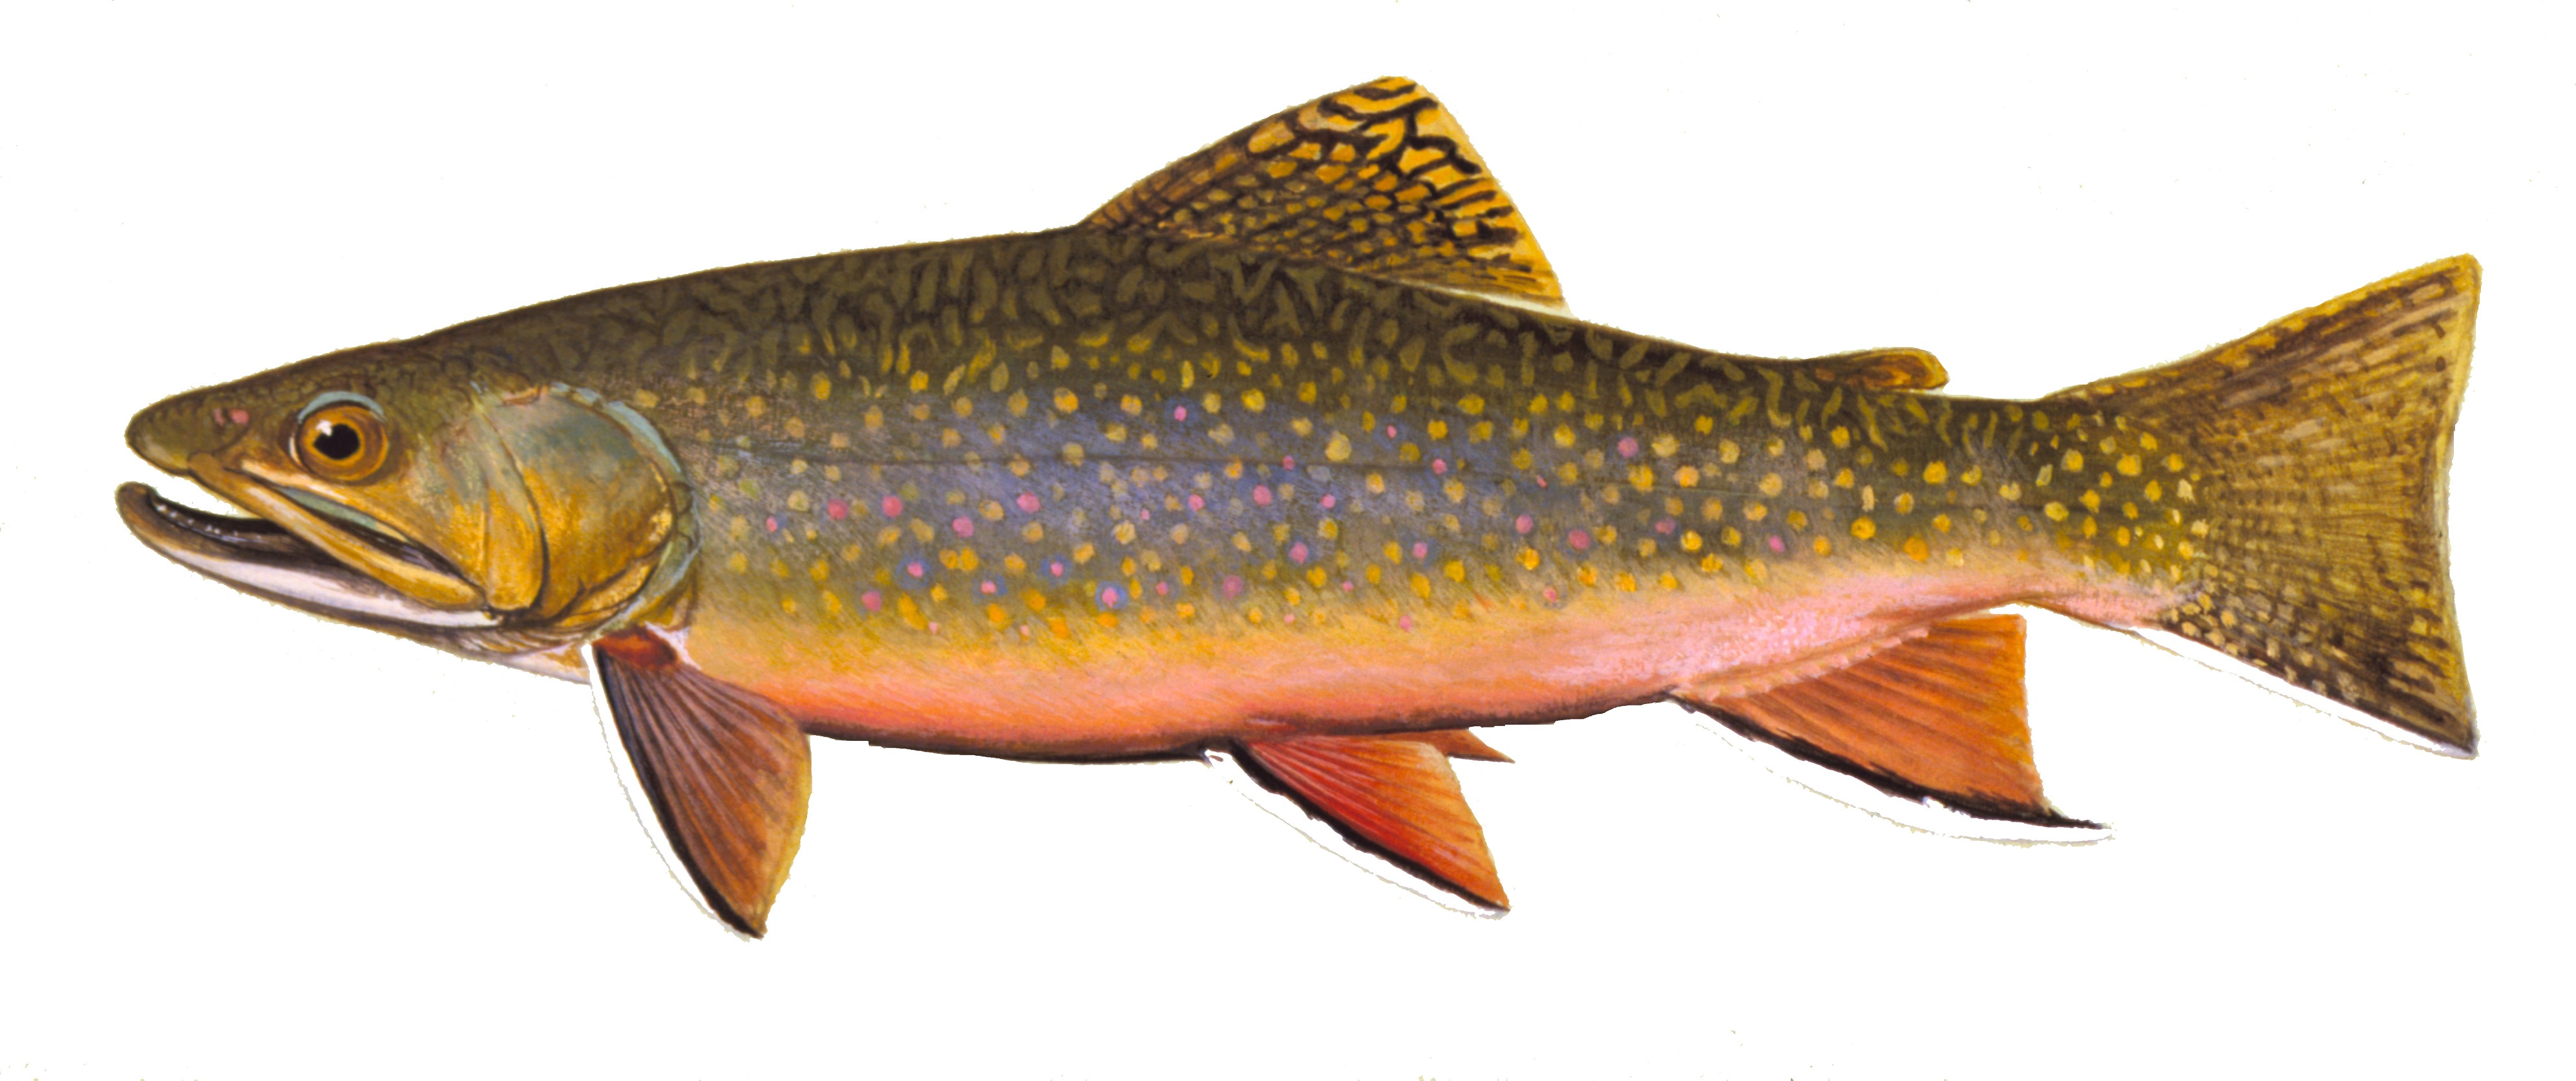 Brook Trout, illustration by Maynard Reece, from Iowa Fish and Fishing.